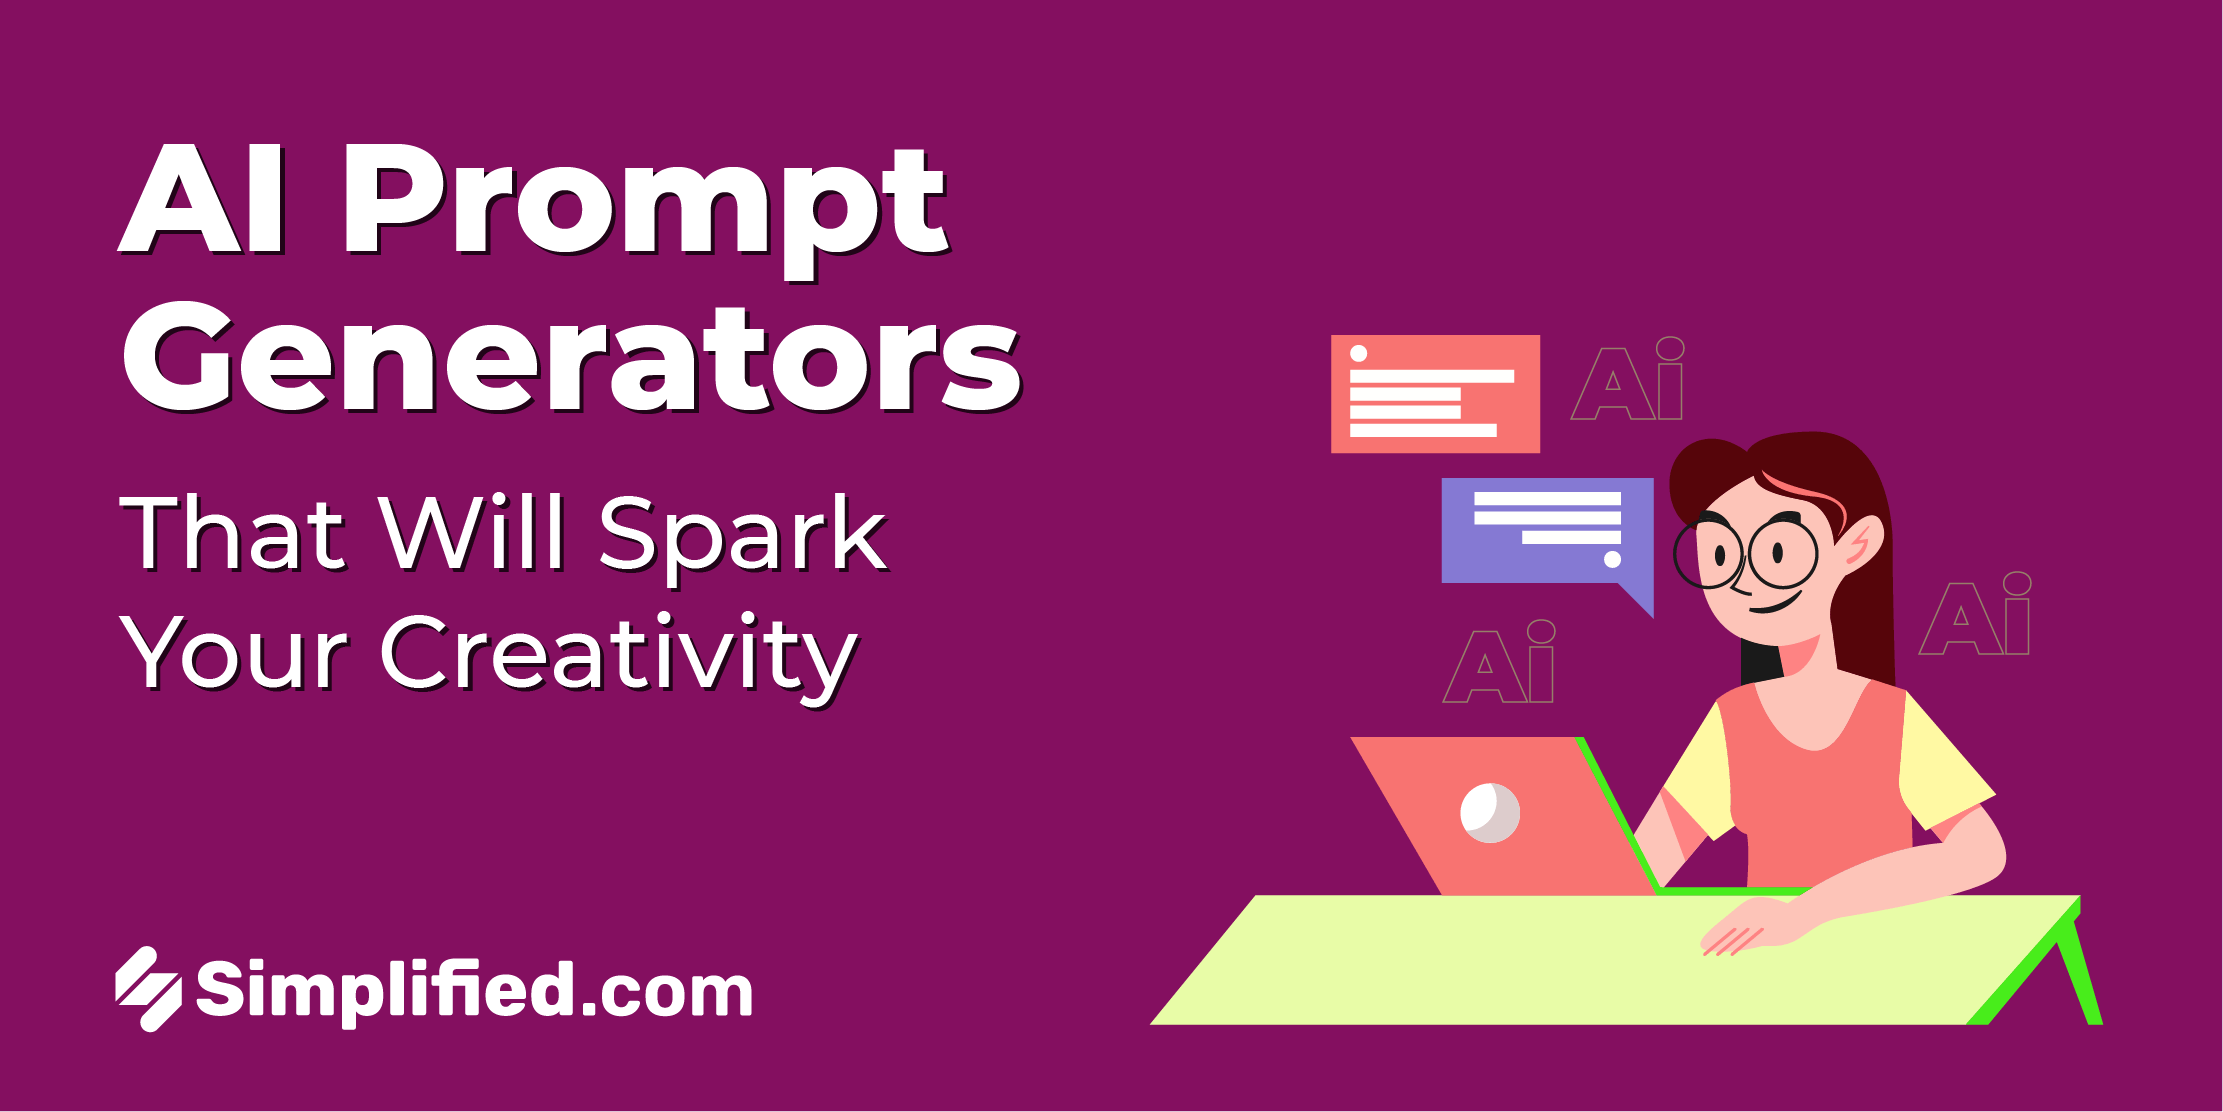 AI Prompt Generators That Will Spark Your Creativity | Simplified